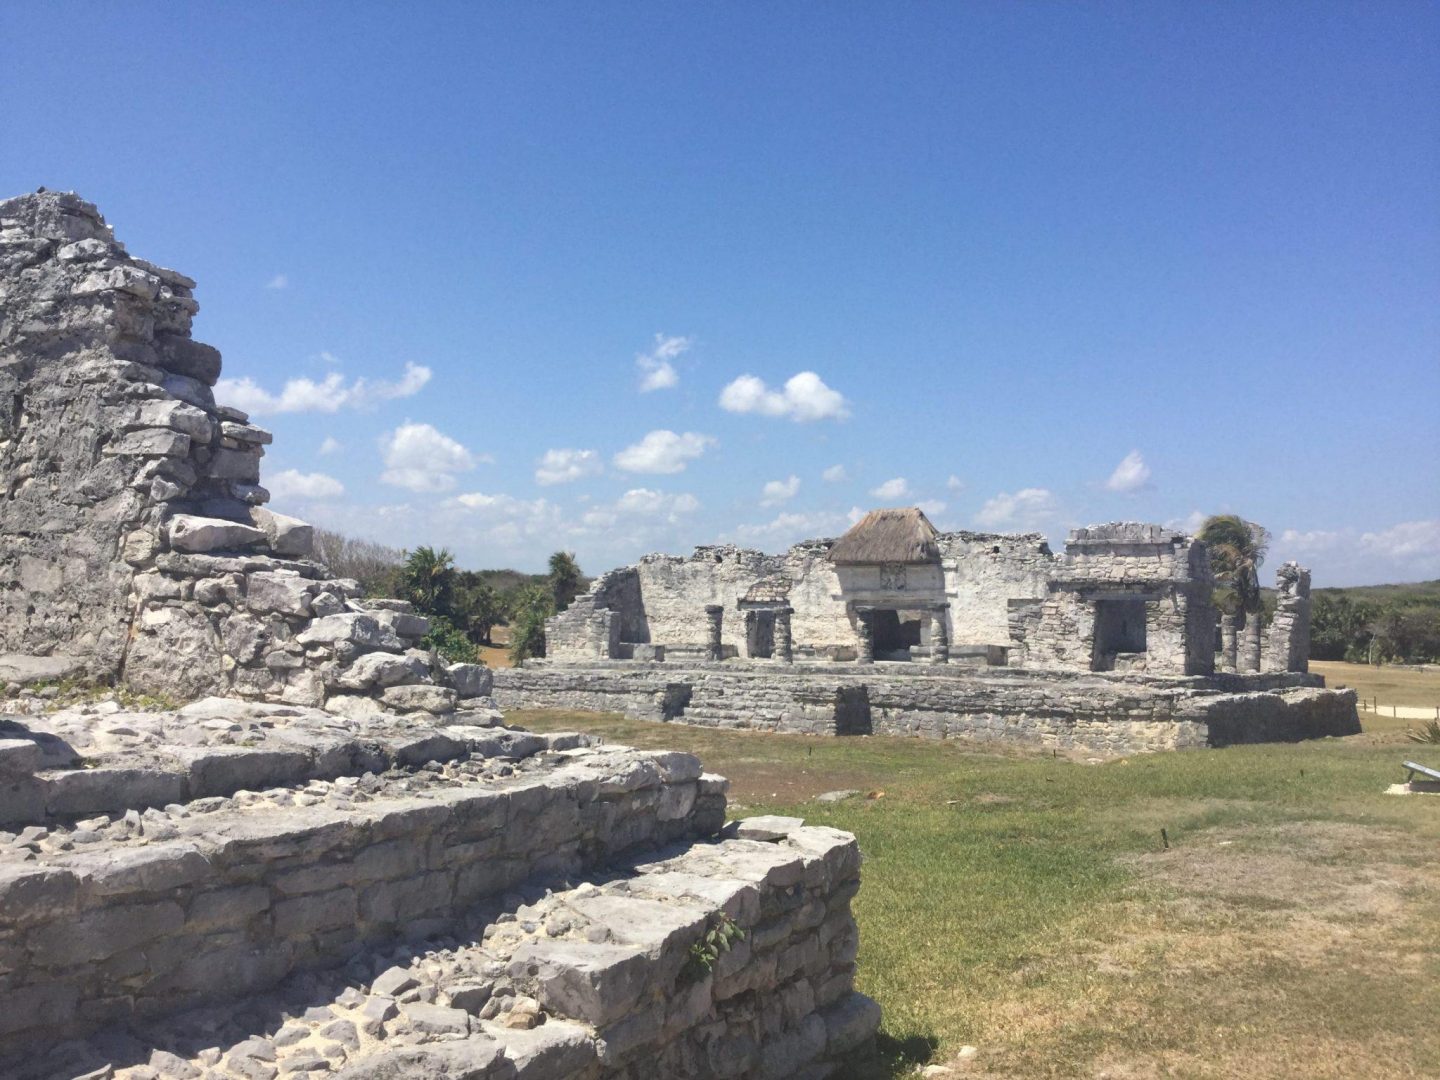 How to see the Mayan Ruins in Tulum Mexico | Travel tips for Mexico